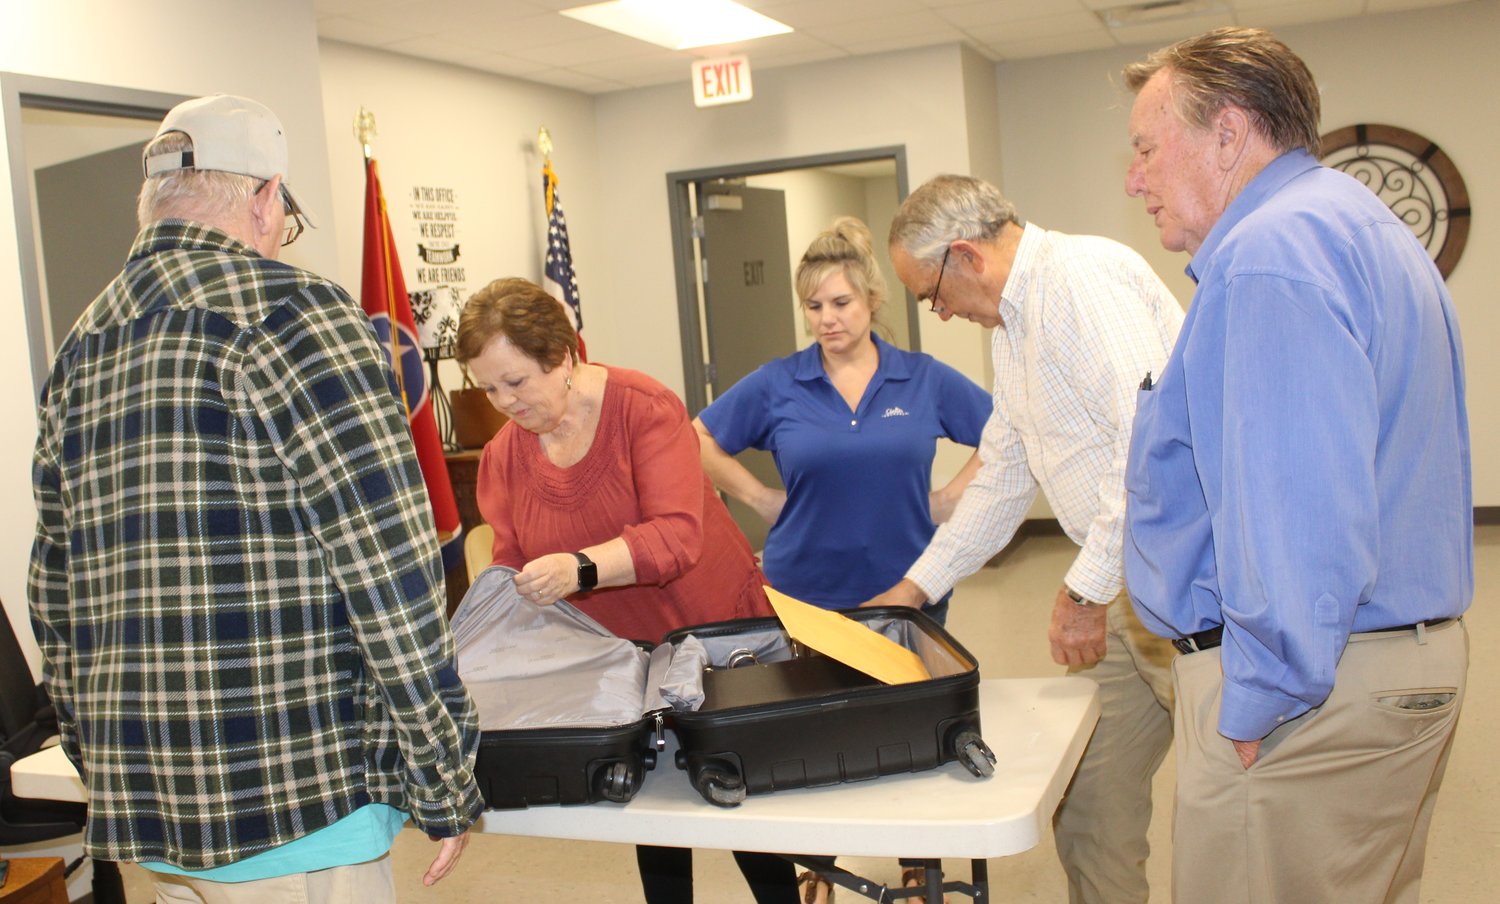 Members of Bedford County Election Commission open the suitcase containing results from the  East Side School precinct in Shelbyville following Tuesday’s elections.